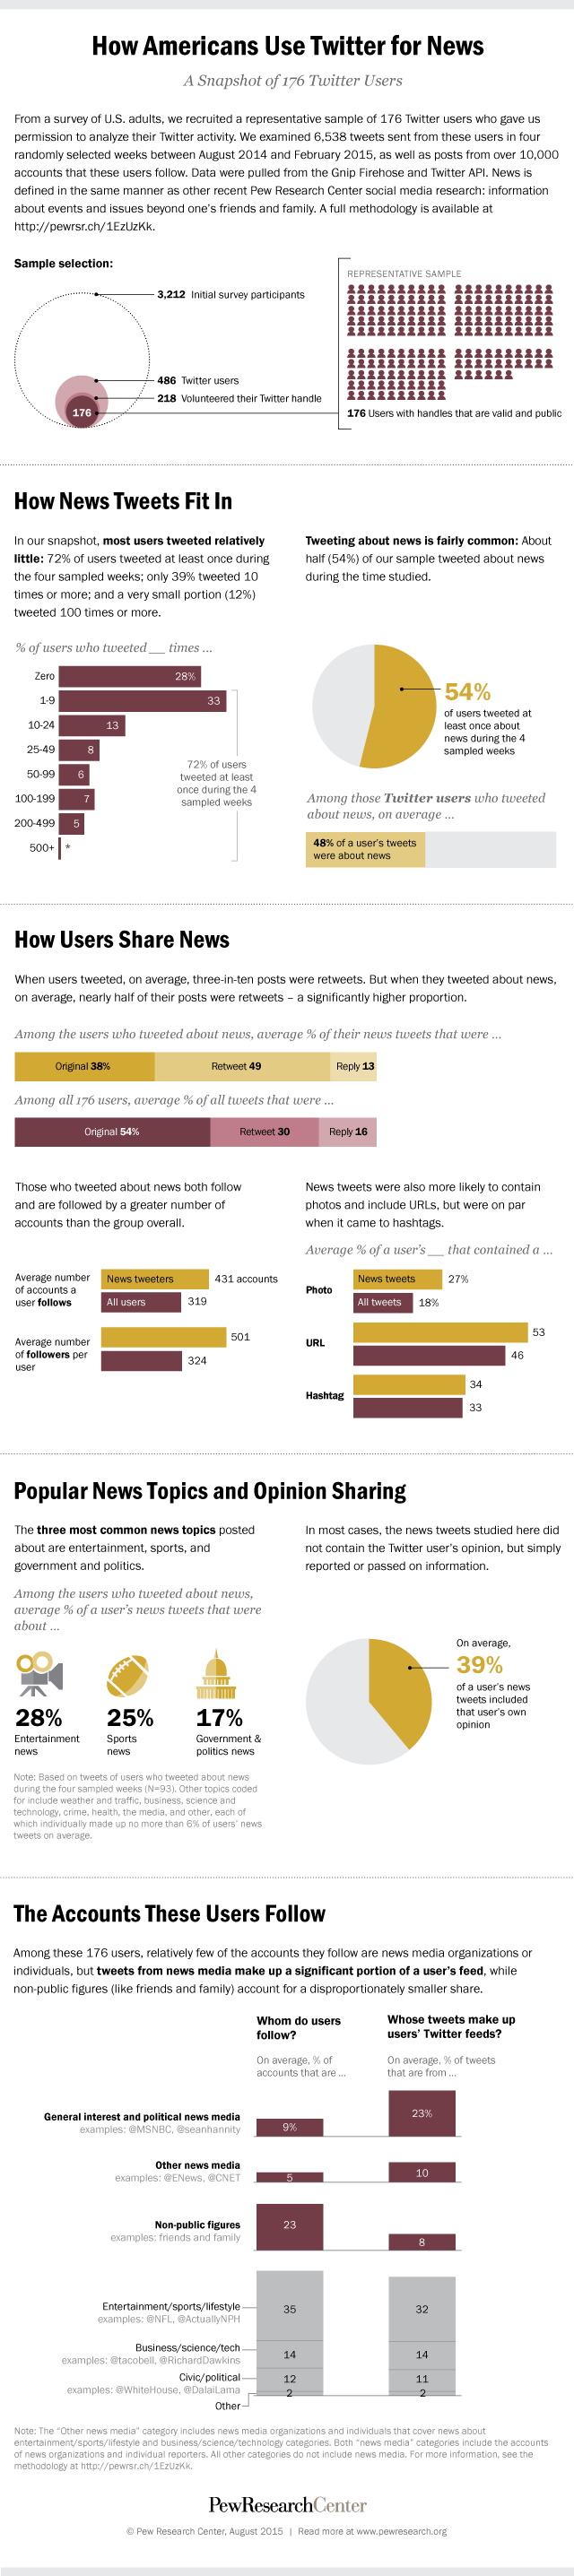 How Americans Use Twitter for News